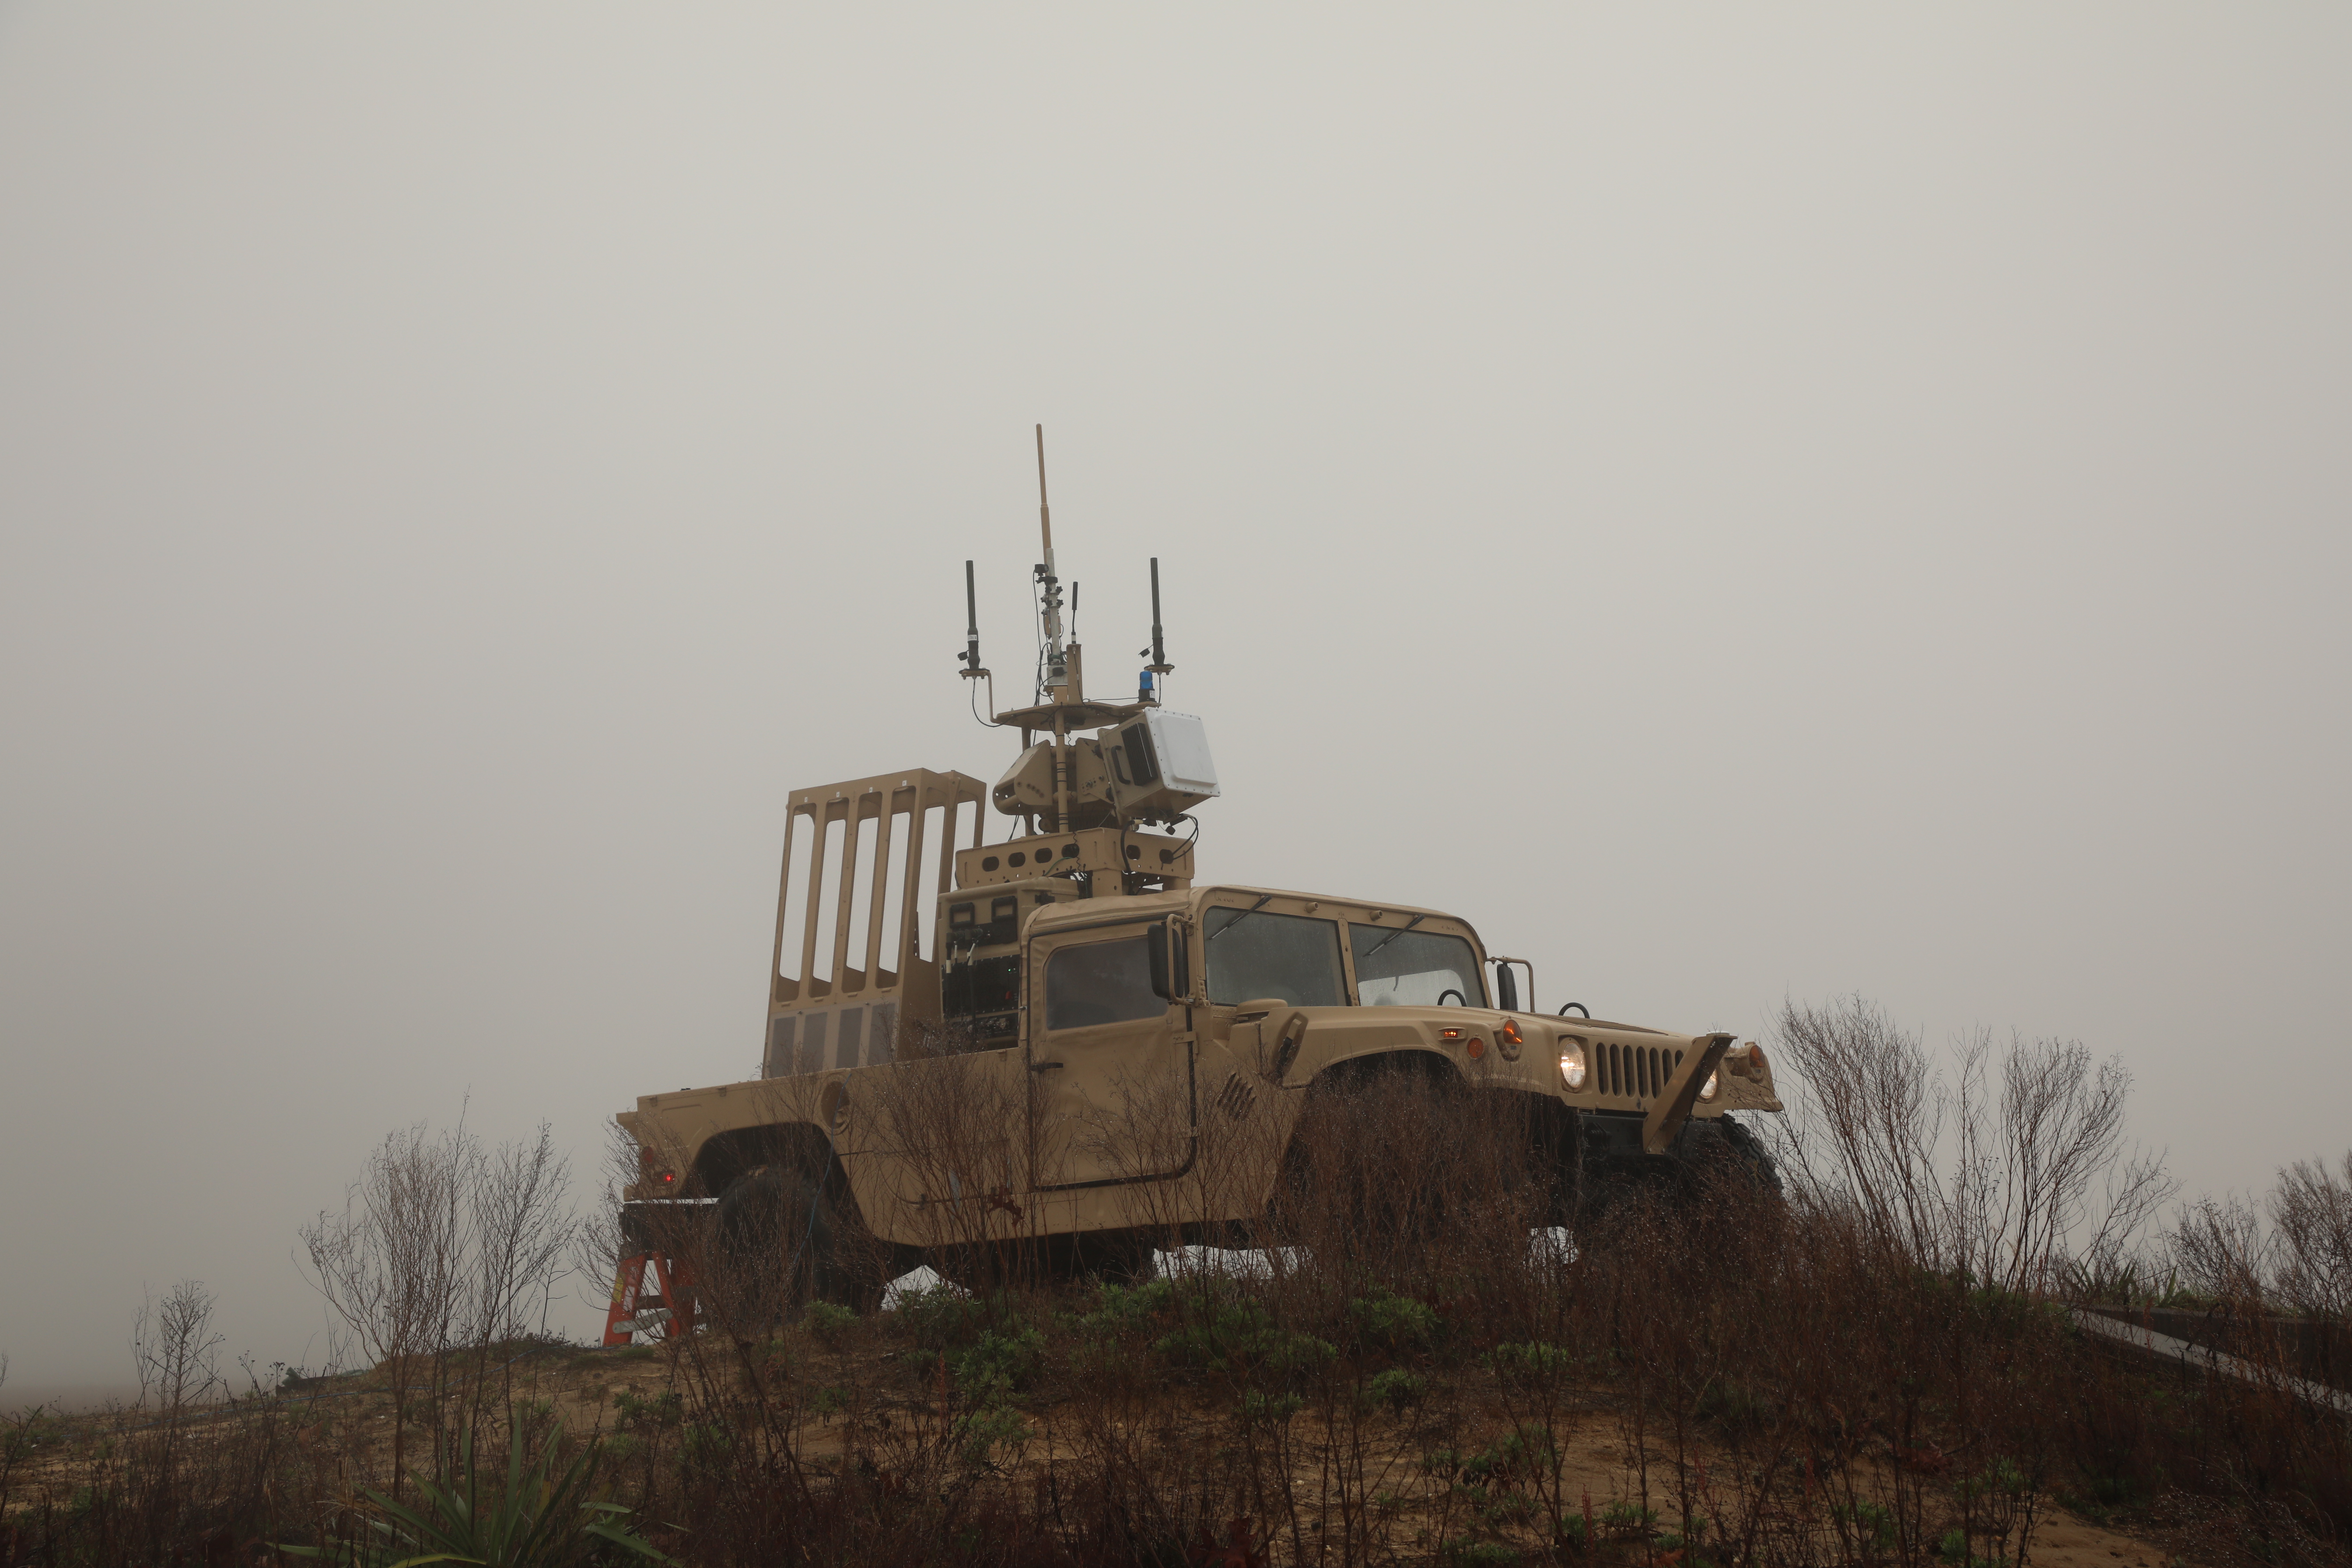 DARPA's Mobile Force Protection Program Concludes with Successful Demonstration